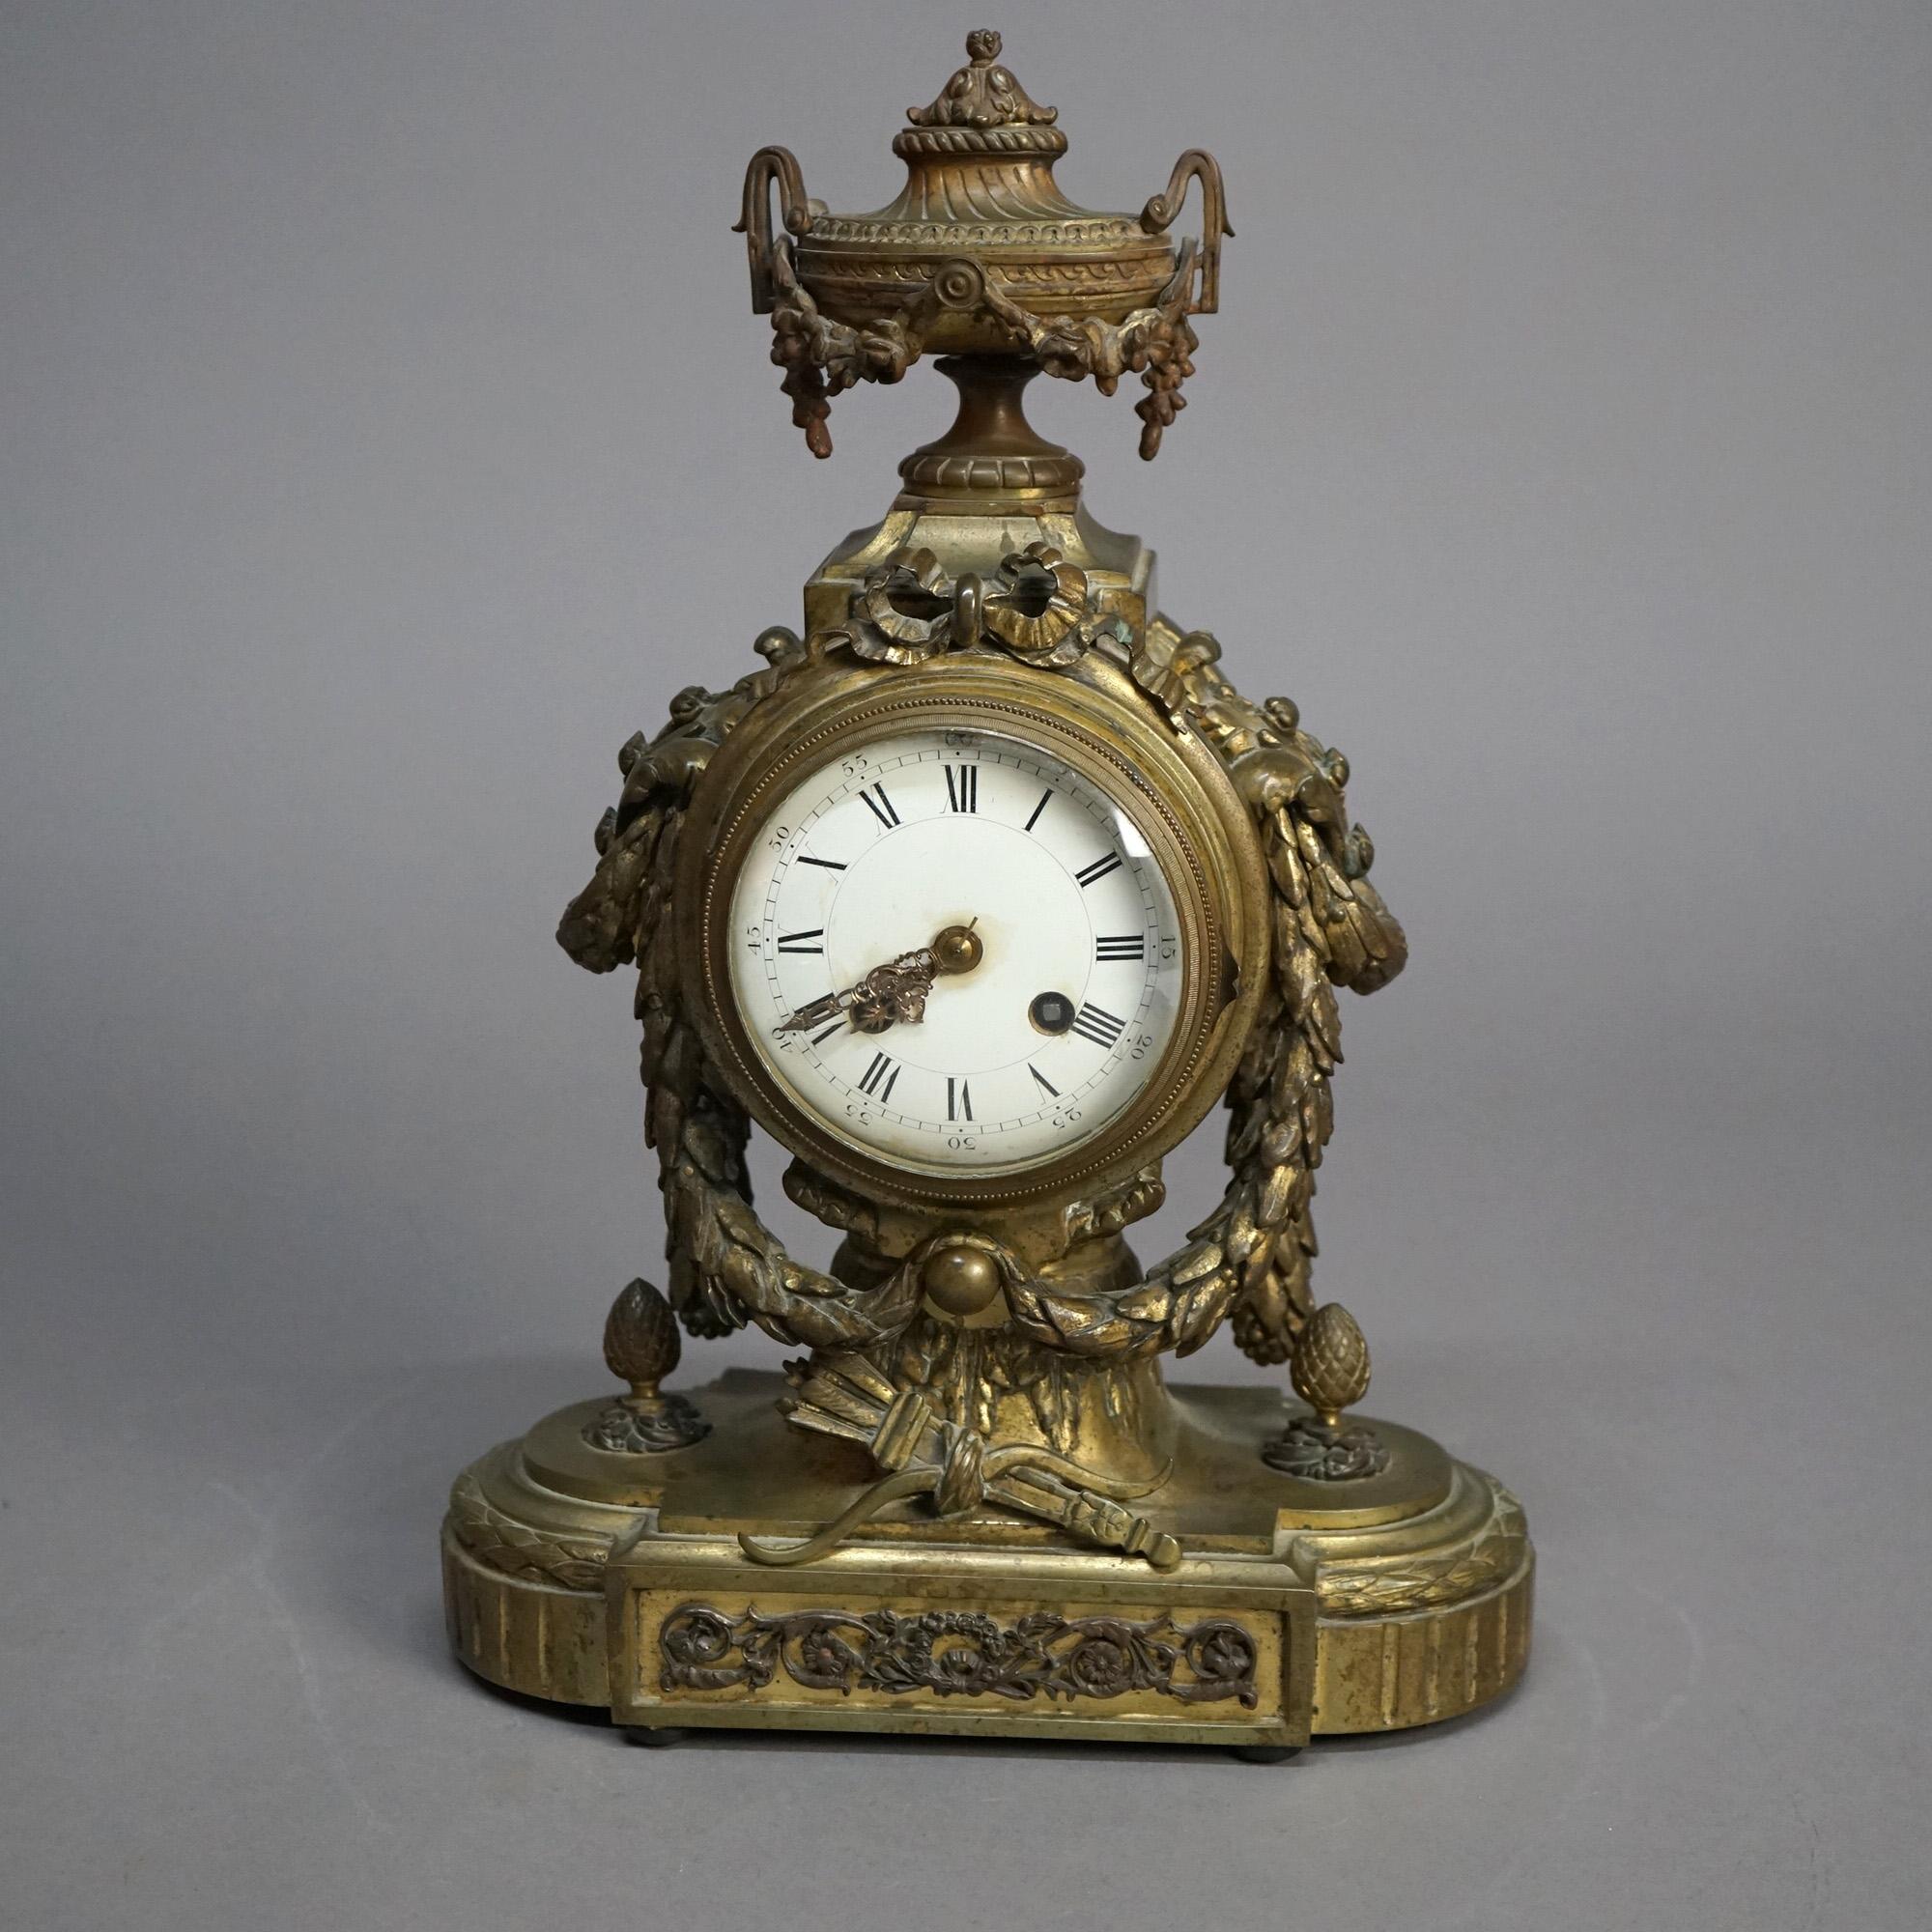 An antique French Empire mantel clock offers cast bronze construction with urn form finial and swag decoration, 20th century

Measures - 14.75